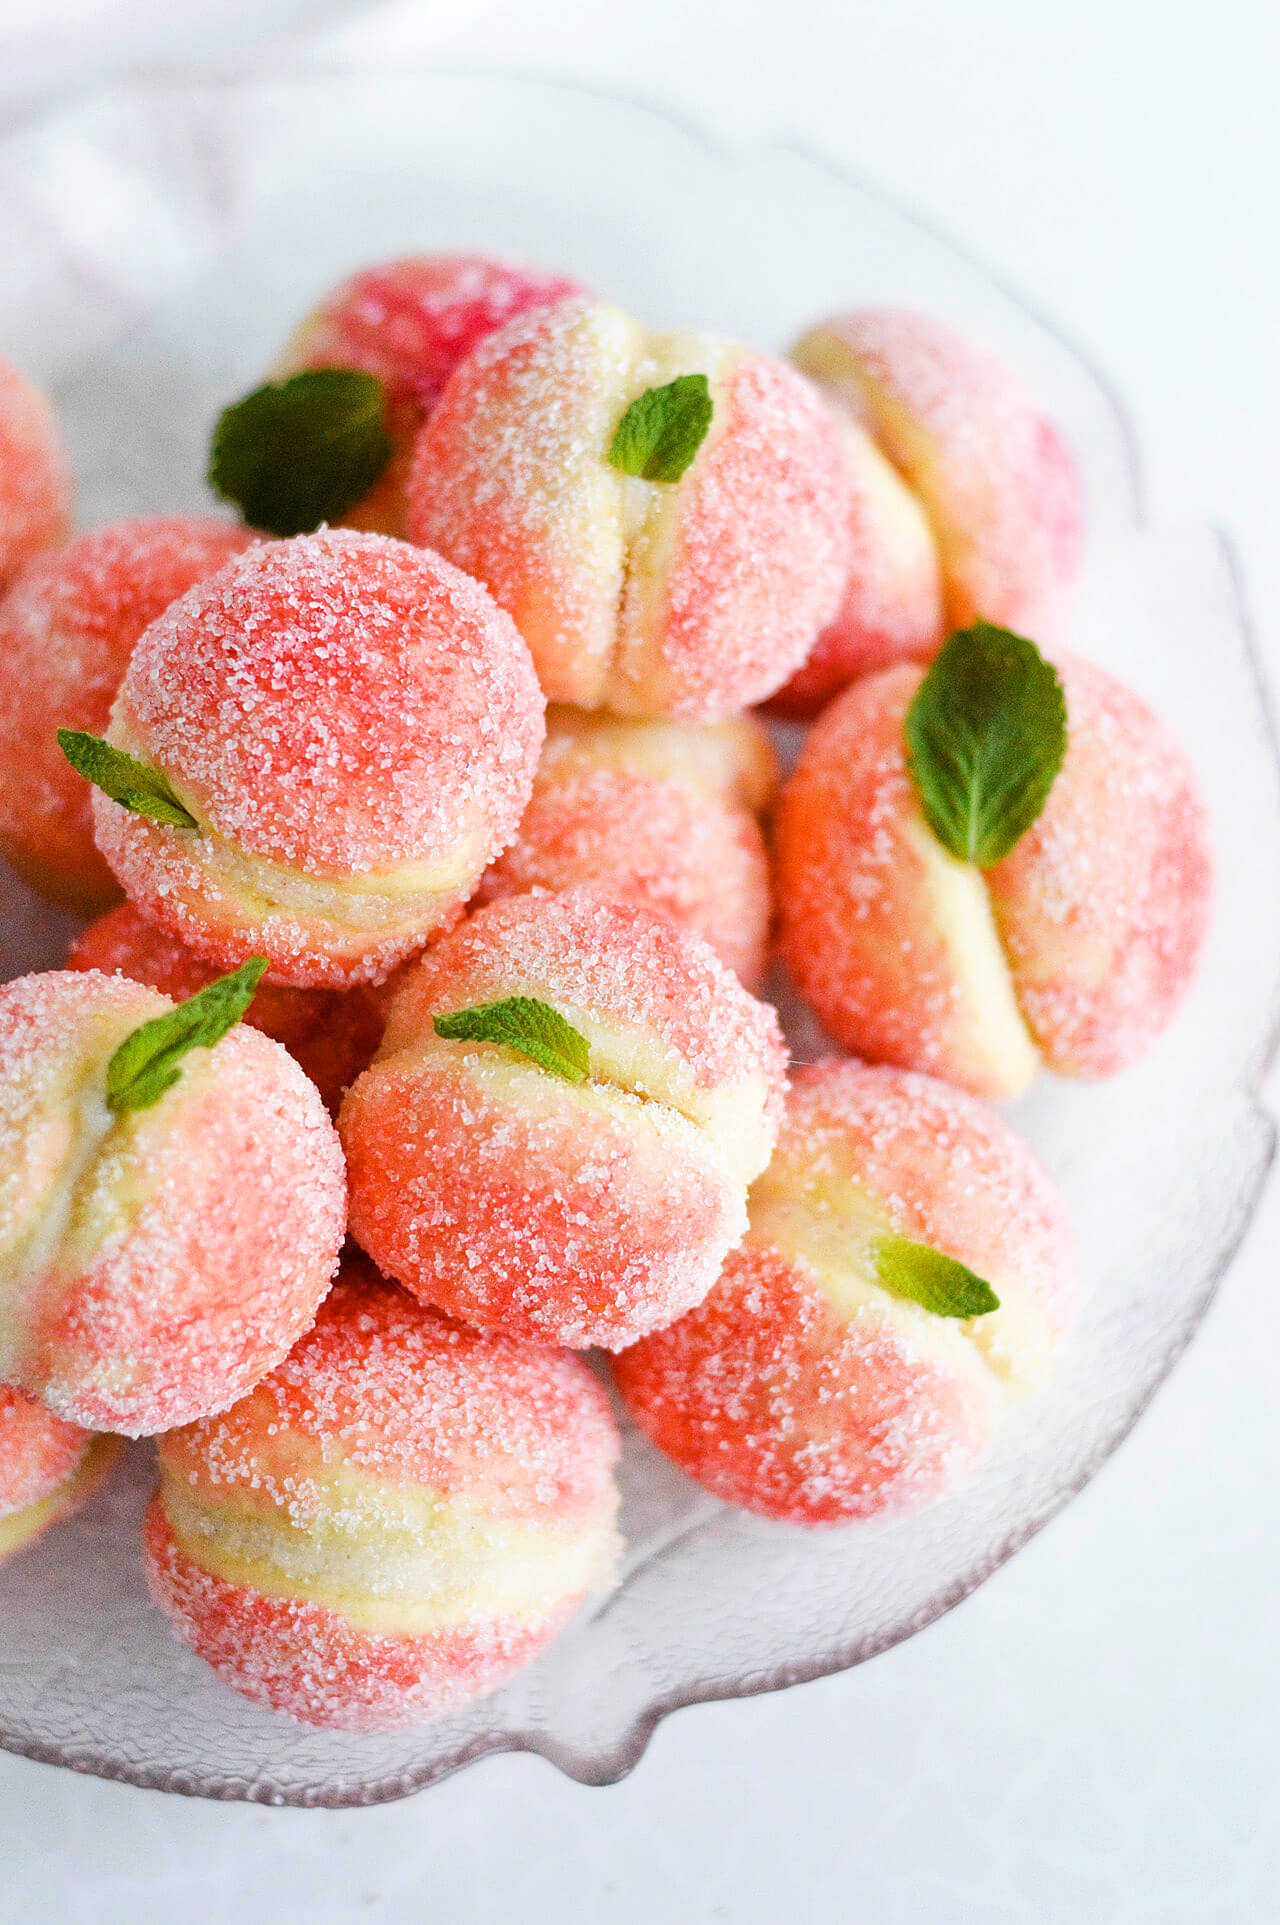 Orange infused sweet ricotta peach cookies with mint leaves and sugar coating